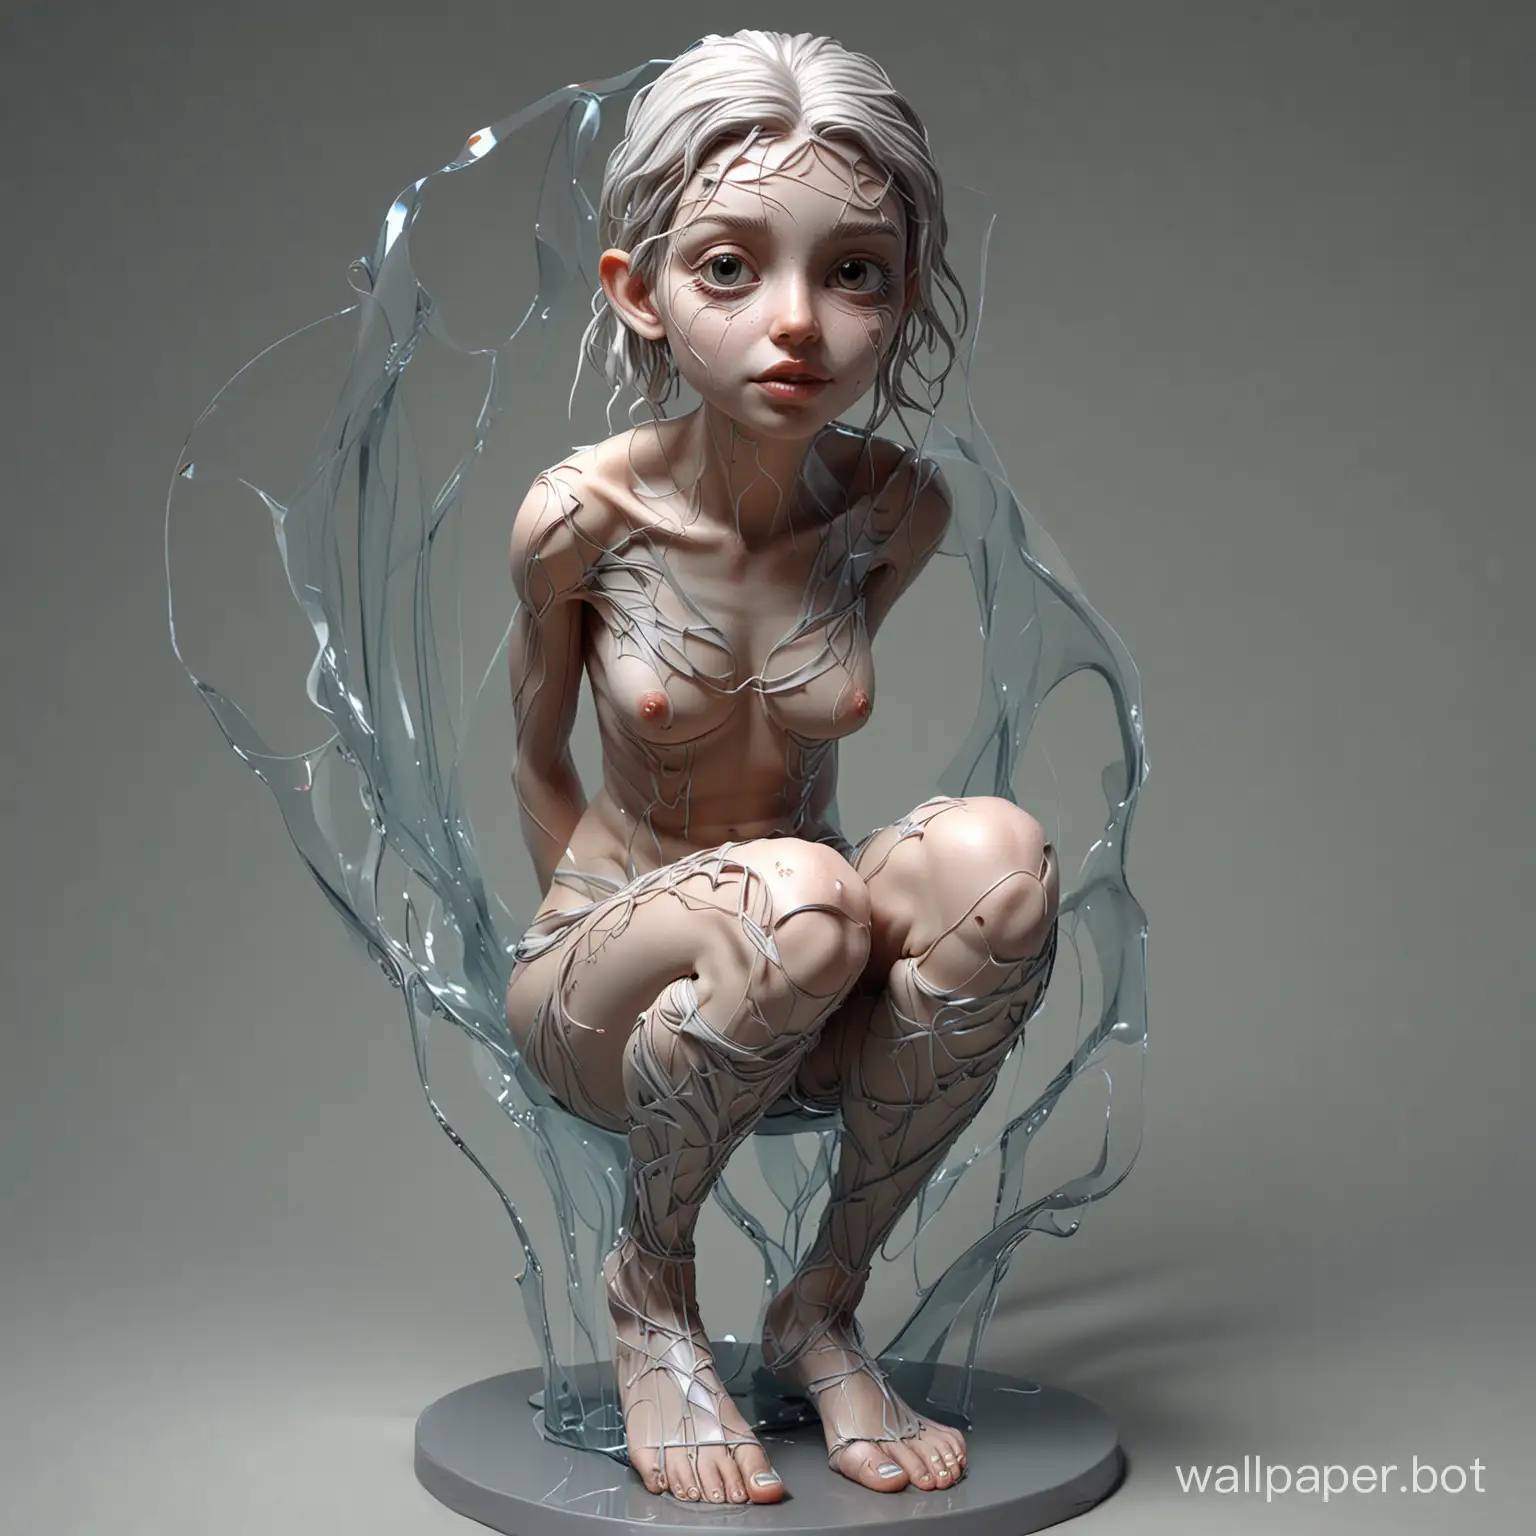 (abstract 3D artwork, digital art:1.3), award-winning sculpture of slender young woman, slight smile, (knees-height portrait:1.5),  created using ZBrush, inspired by Dan Mumford and Tom Bagshaw's style, trapped in liquid, big eyes, thick lips, three breasts, designed to evoke emotions, swirl, swirl ornamentation tattoos, silver color tattoos, intricate metal details intertwining with the figure, not realistic but artistically stylized,  influenced by Marc Adamus' vision, glass face reflecting distorted expressions, surreal and otherworldly, 